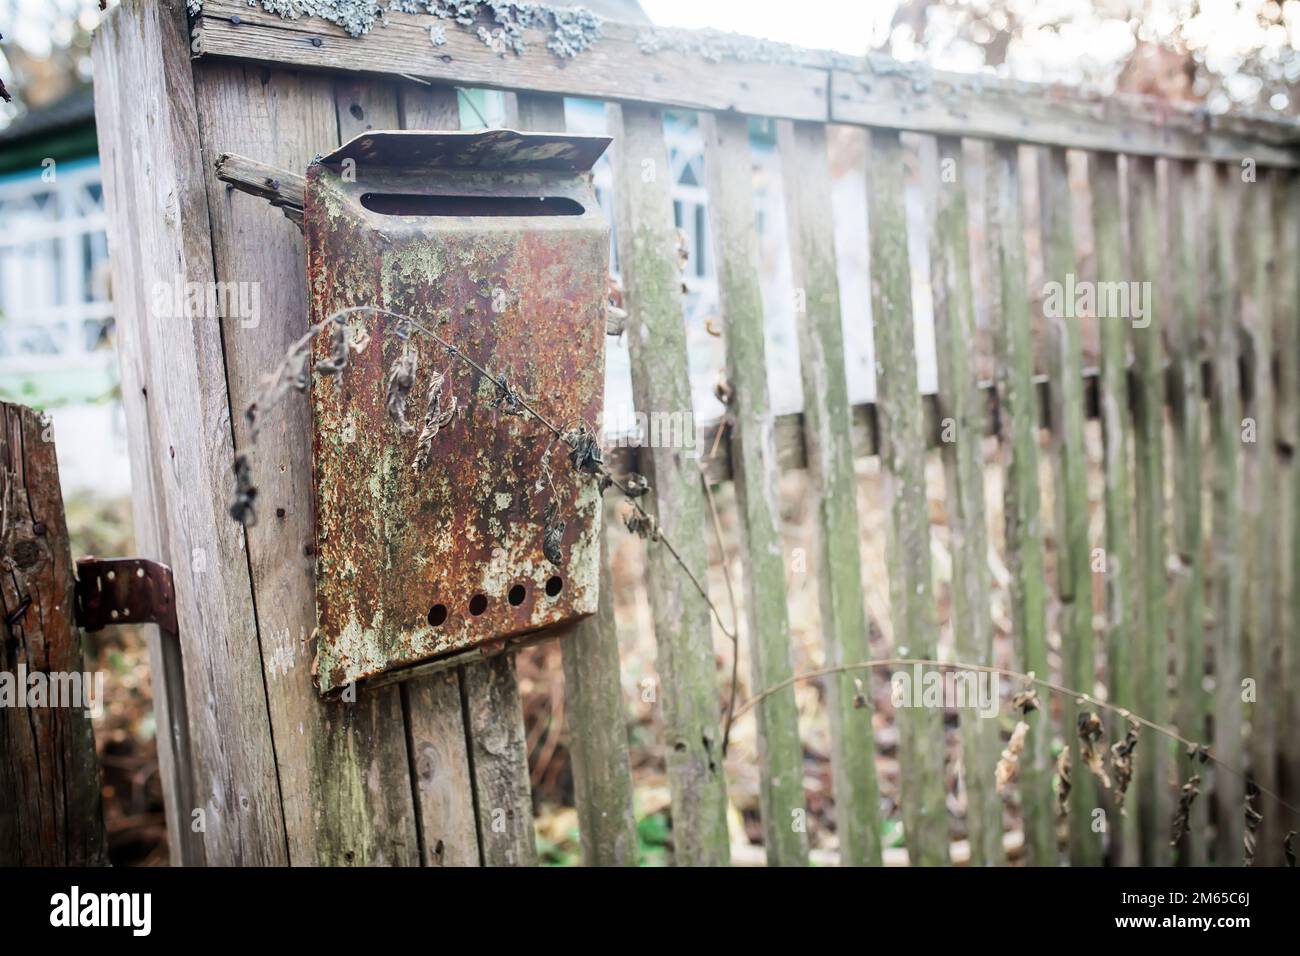 An old mailbox on the fence. Vintage rusty mailbox on a wooden fence Stock Photo